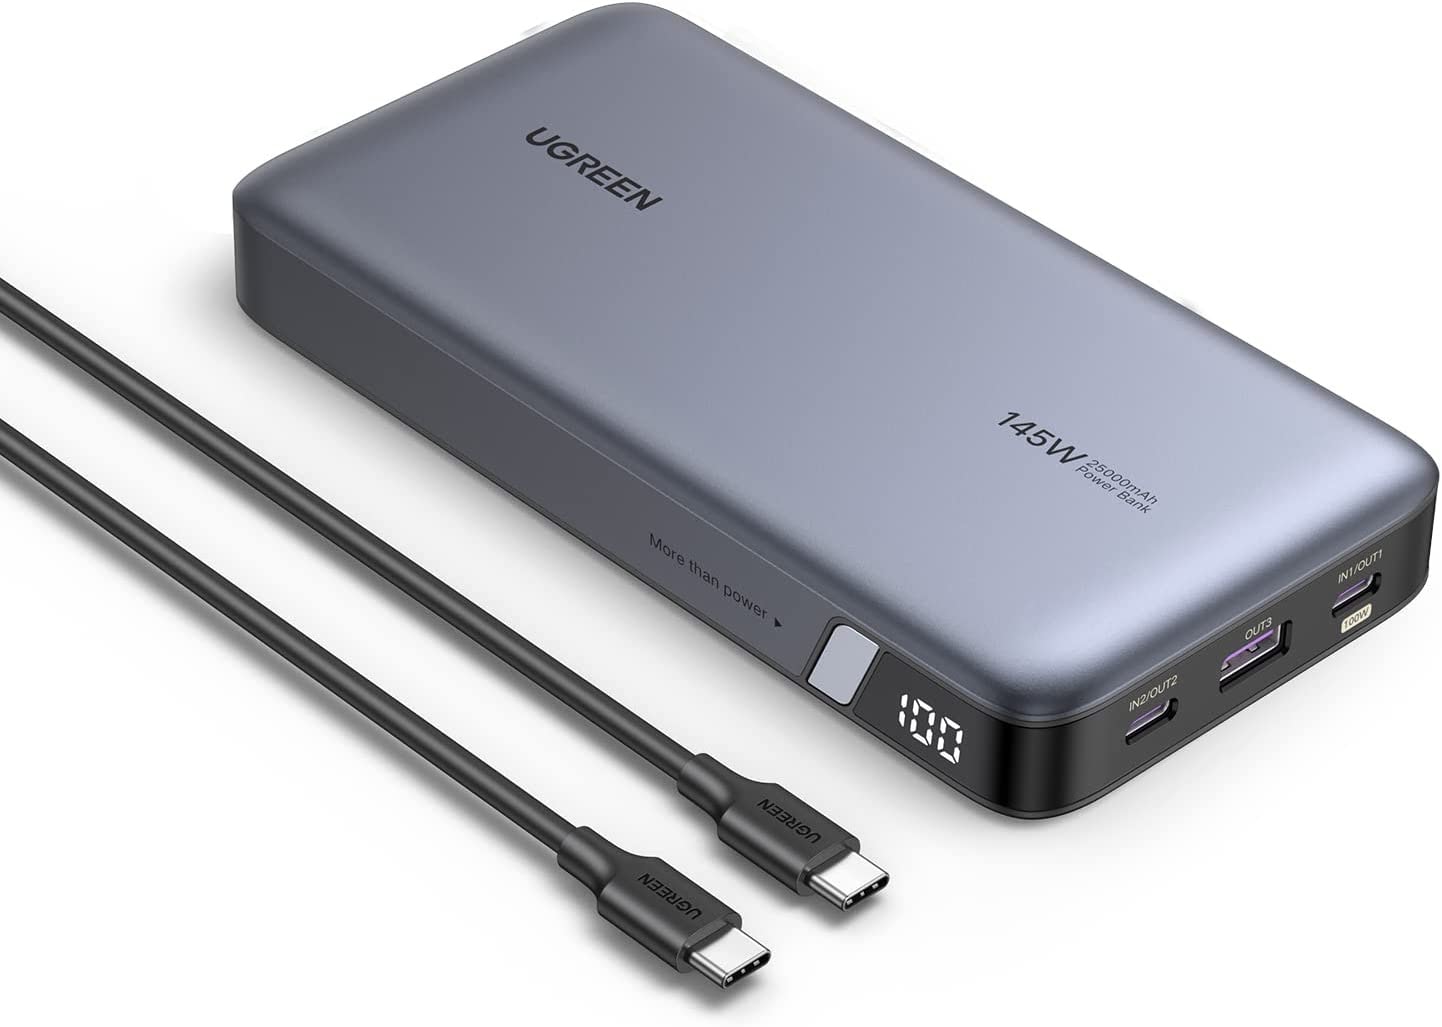 Charge up to three devices at once from the new power bank's big 25,000mAh battery.